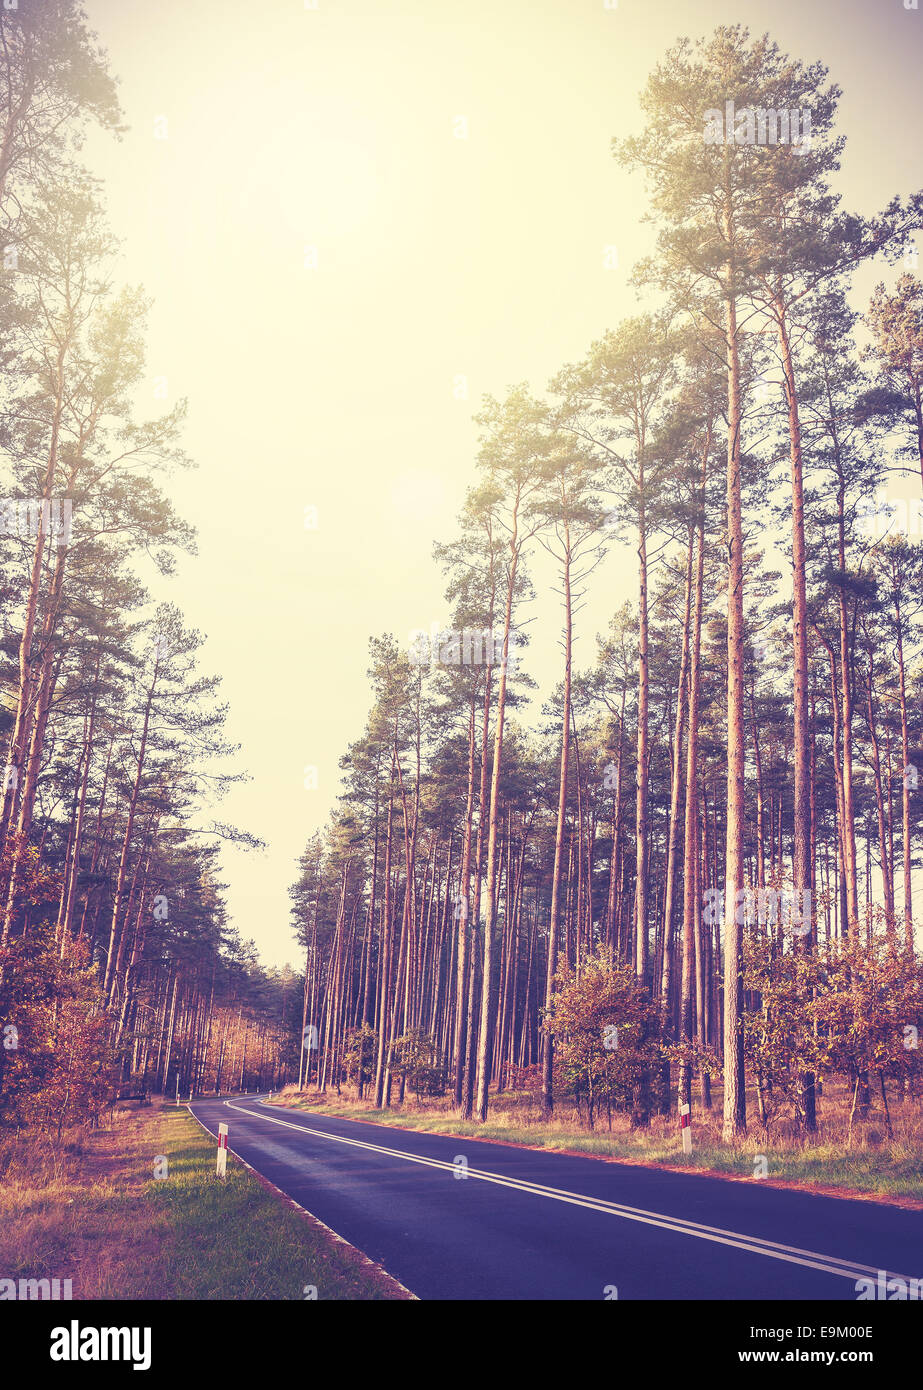 Vintage retro styled picture of a road in forest. Stock Photo